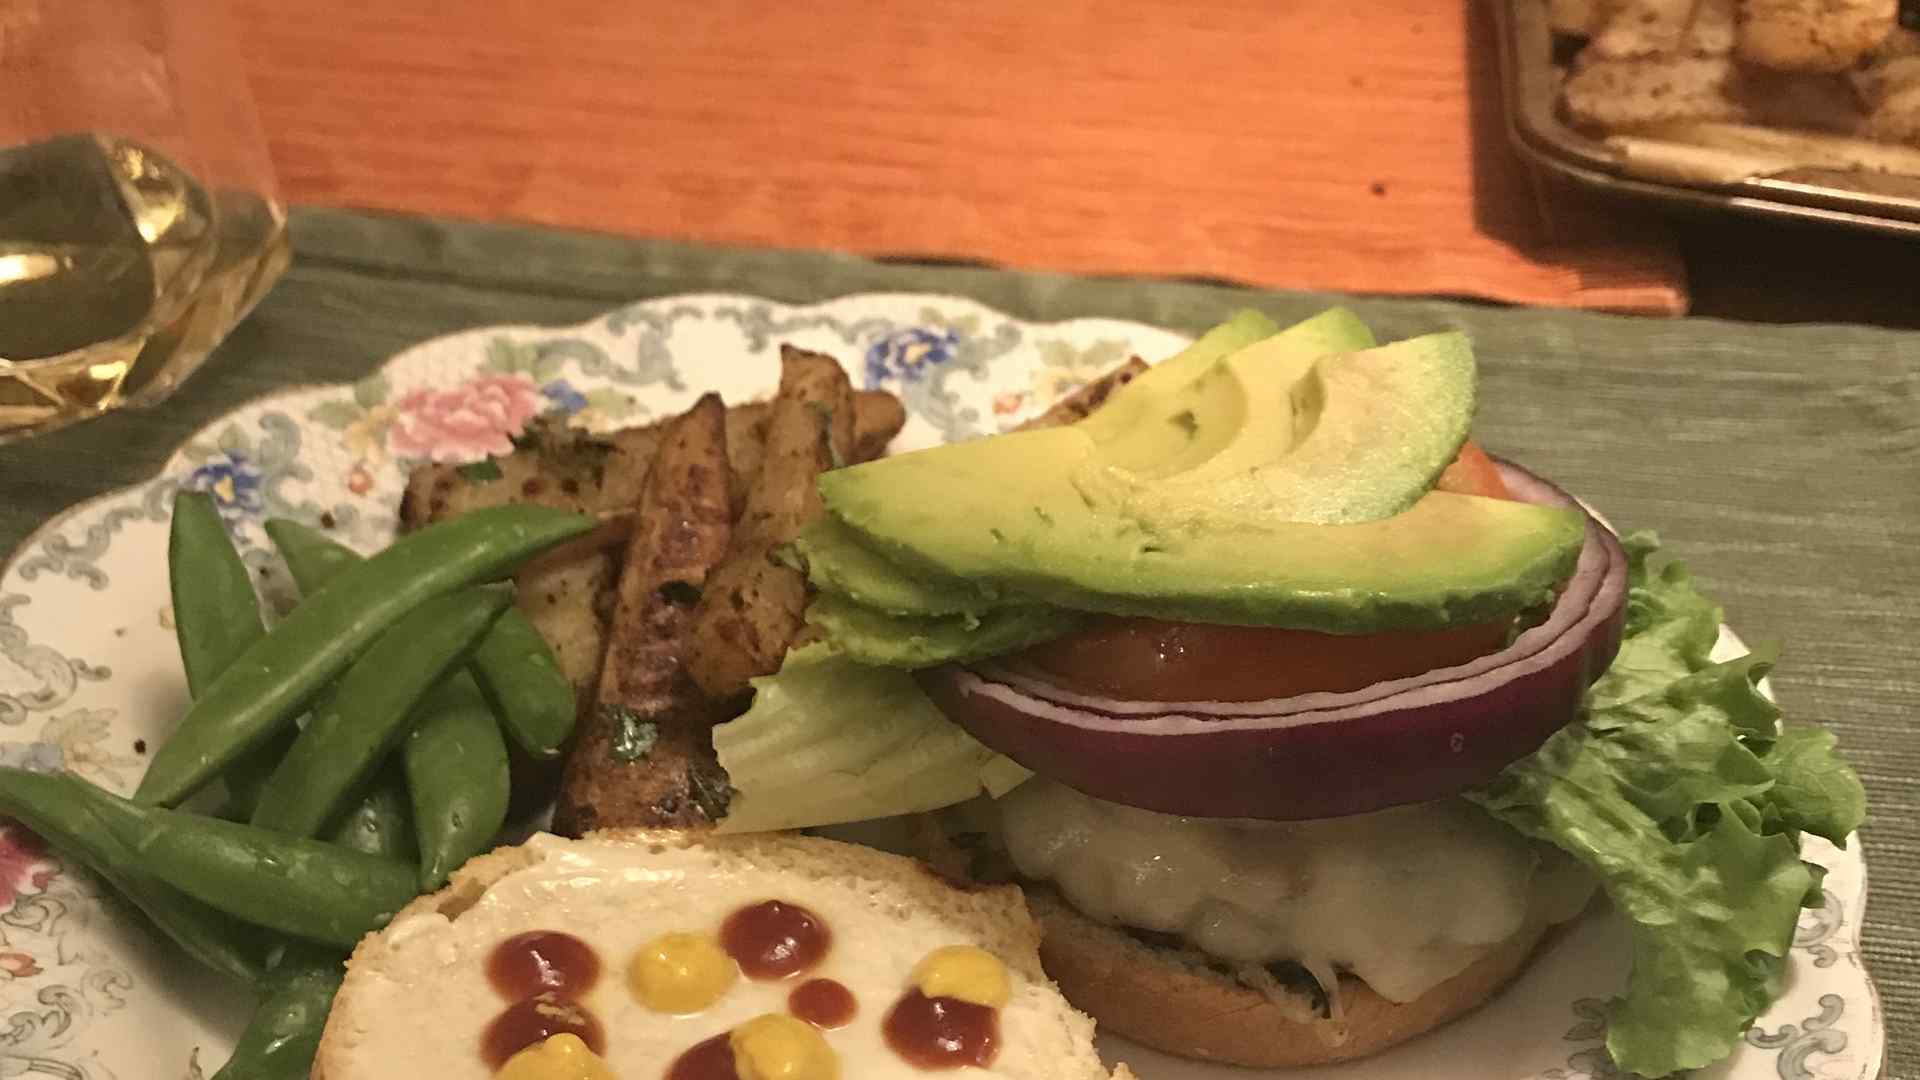 A plate with a burger and green beans